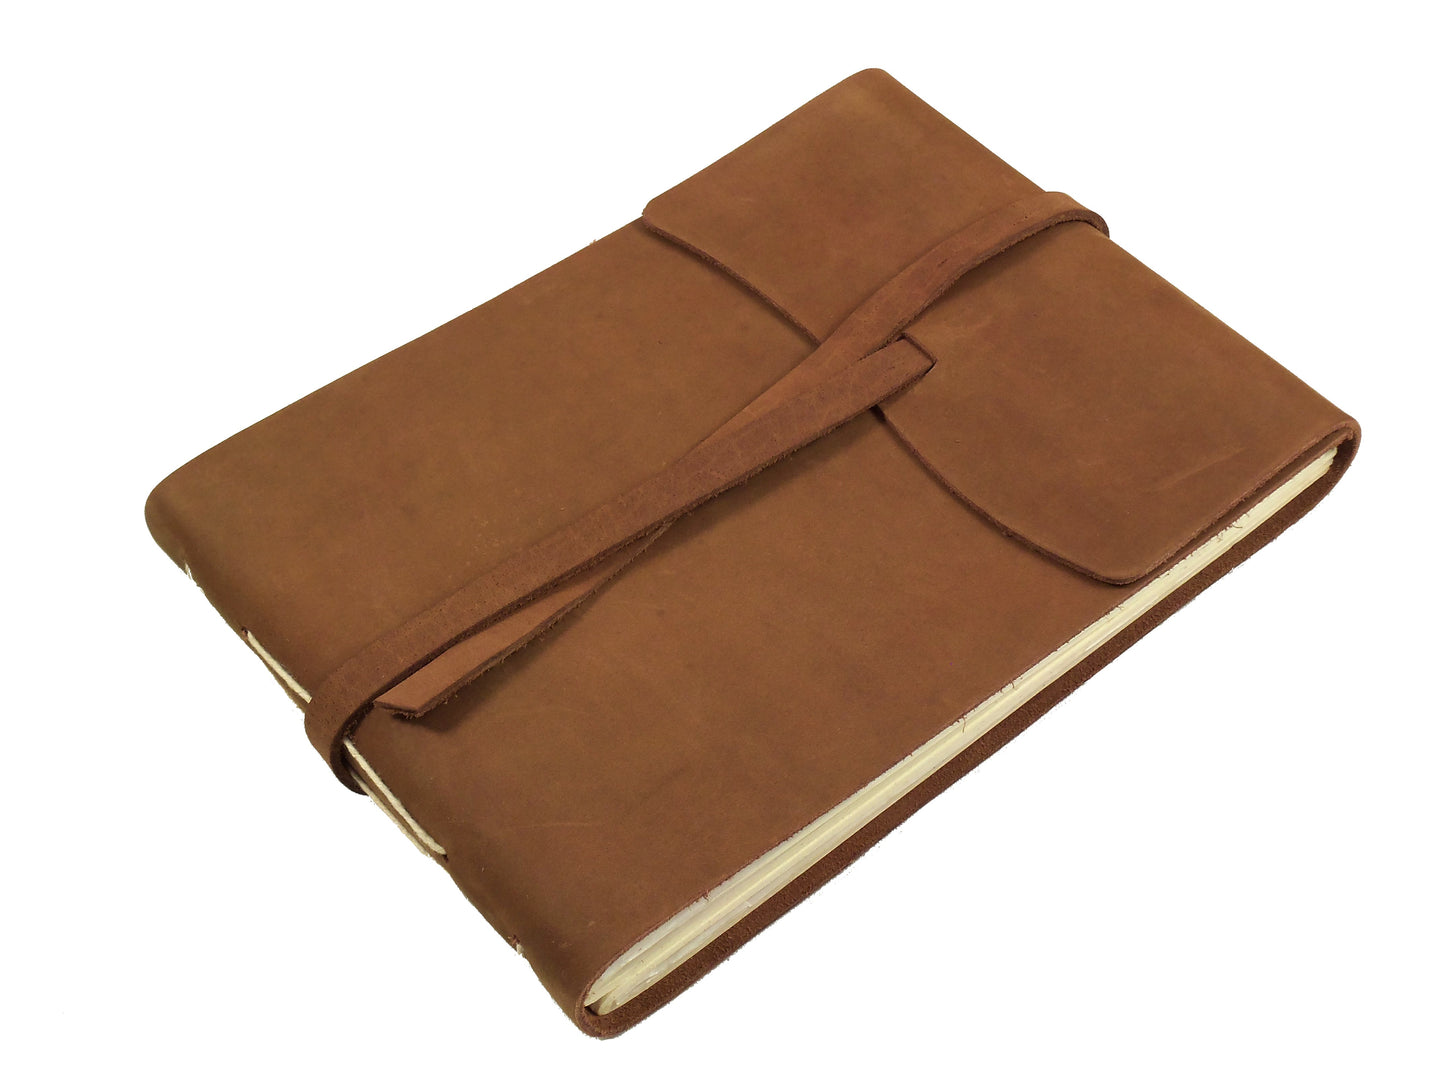 Leather Compact Window Photo Album by Gallery Leather, 9.25 x 8, 30  sheets/60 pages, 120 photos, Refillable, Freeport Slate 